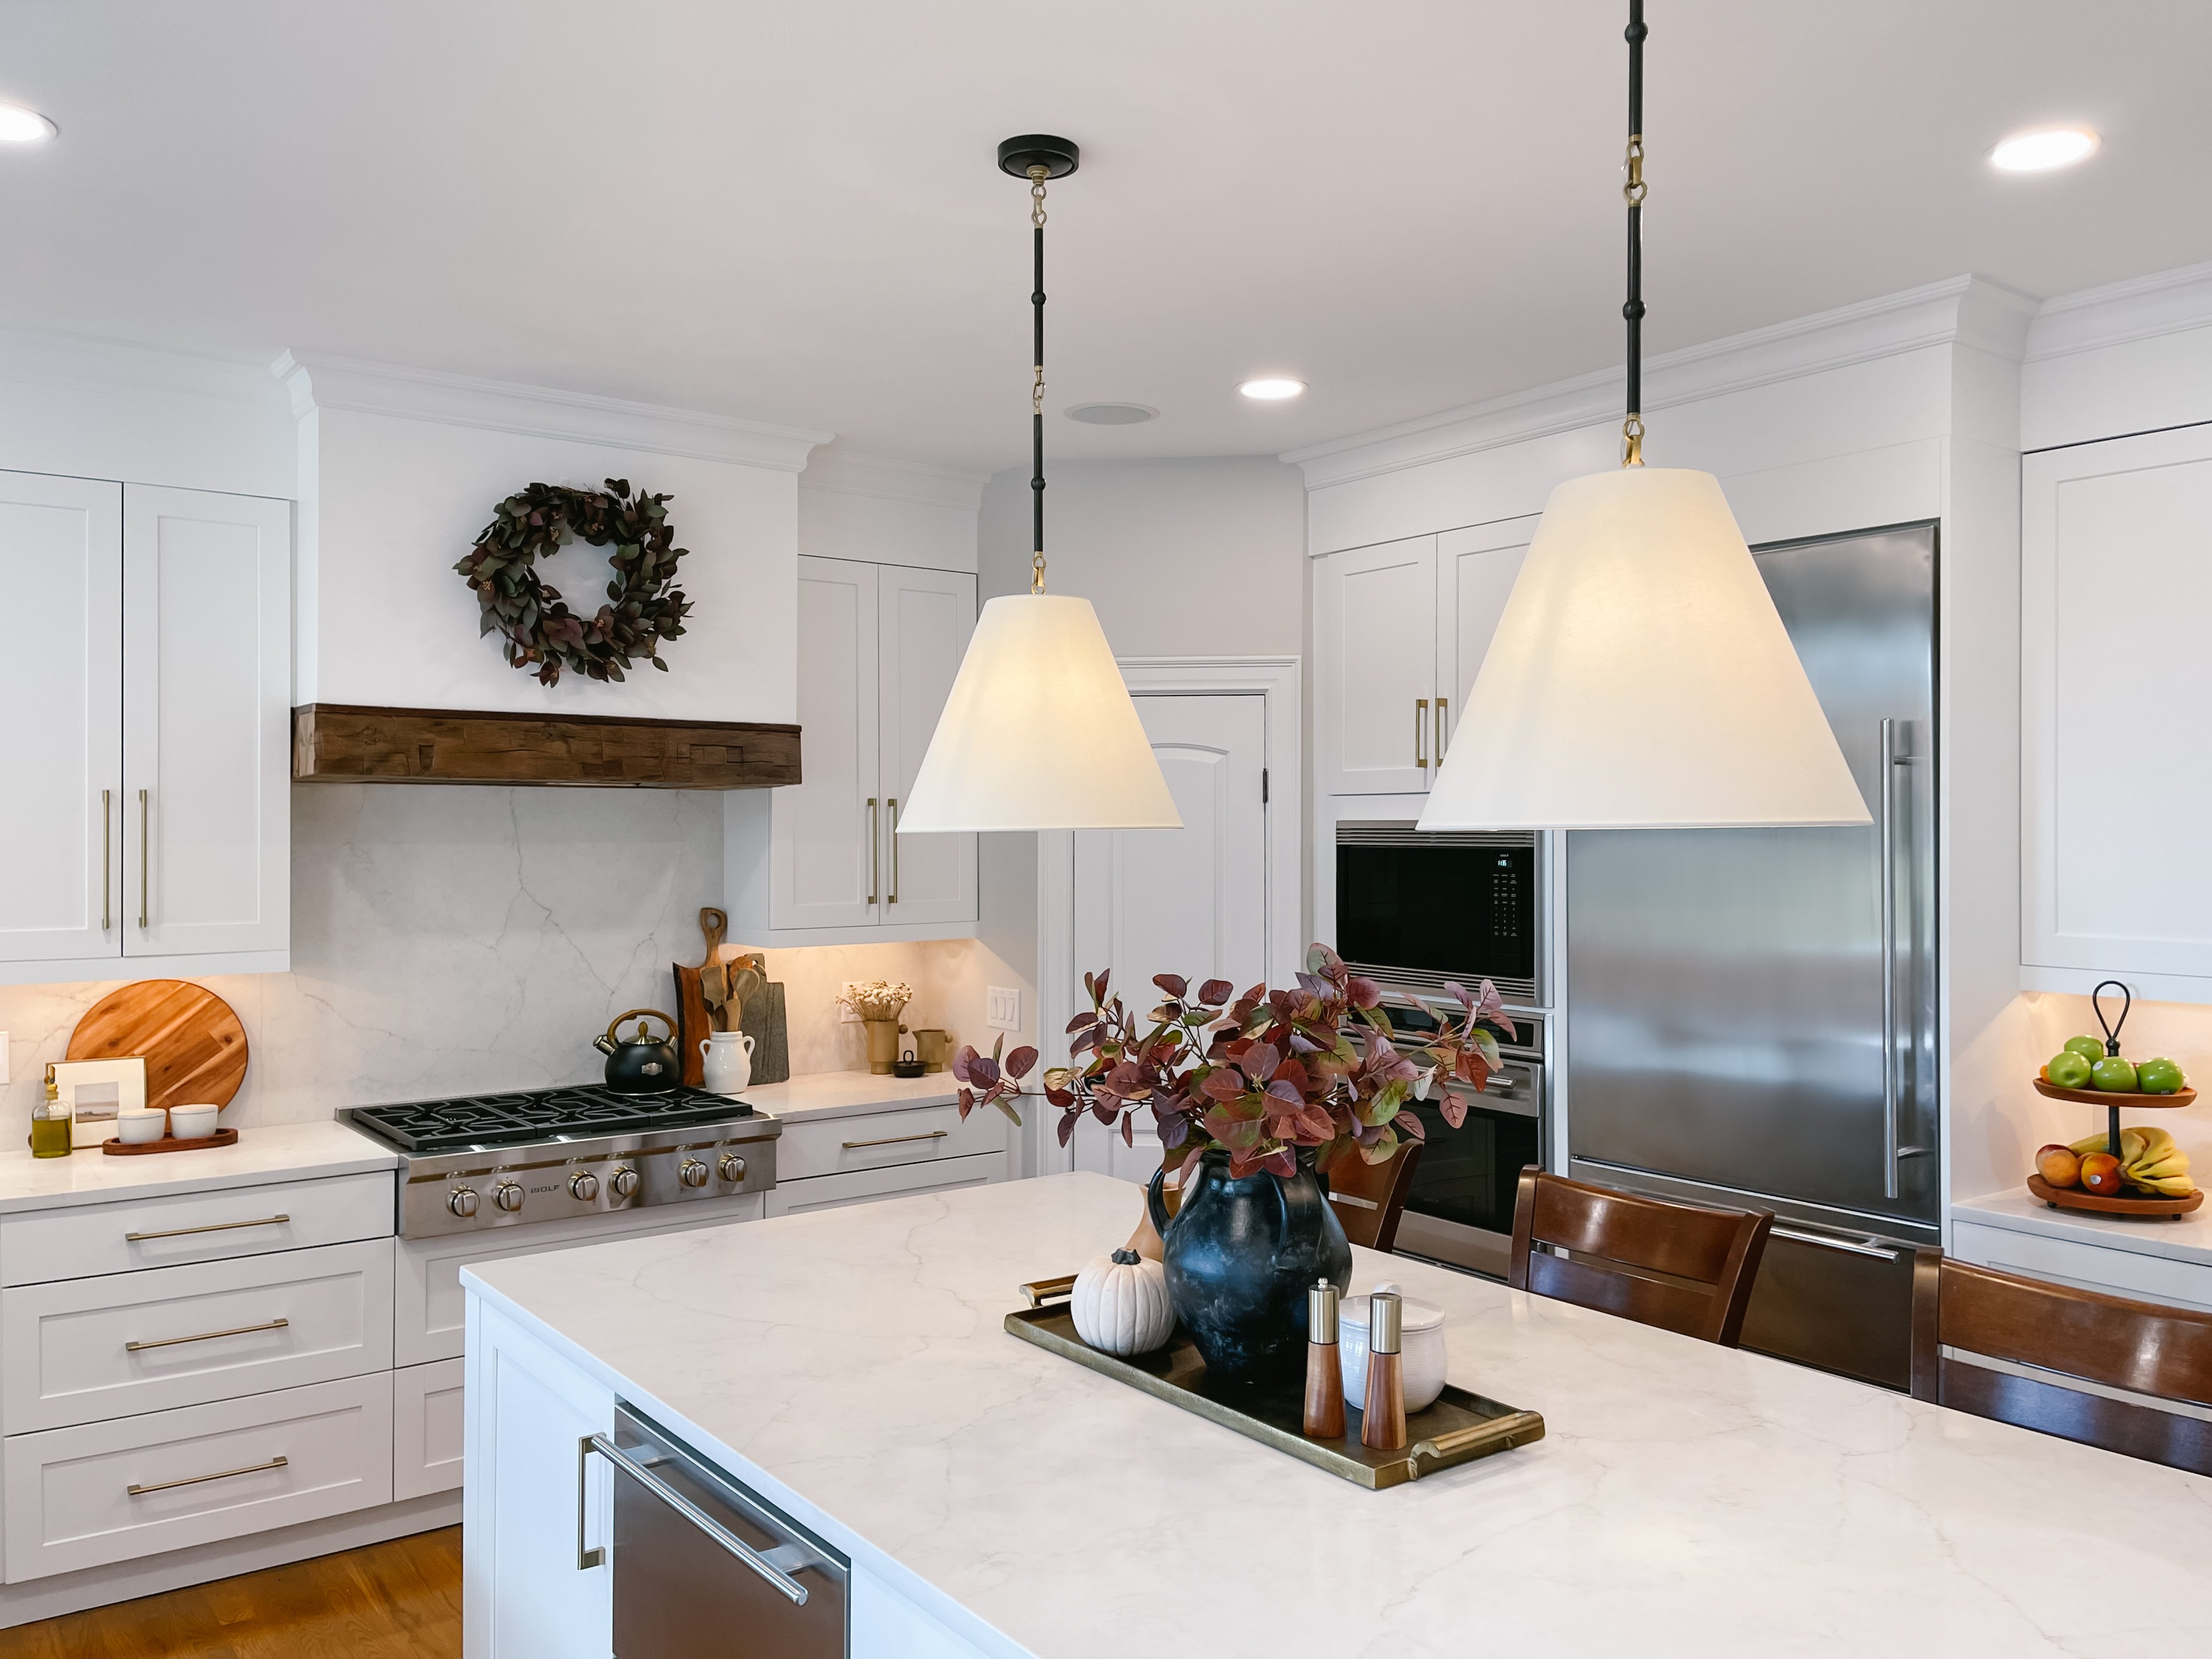 Farmhouse, mid-century style kitchen with white cabinets, subtly marbled quartz countertops and backsplash, a large island, custom hood, and custom light fixtures. 1/2